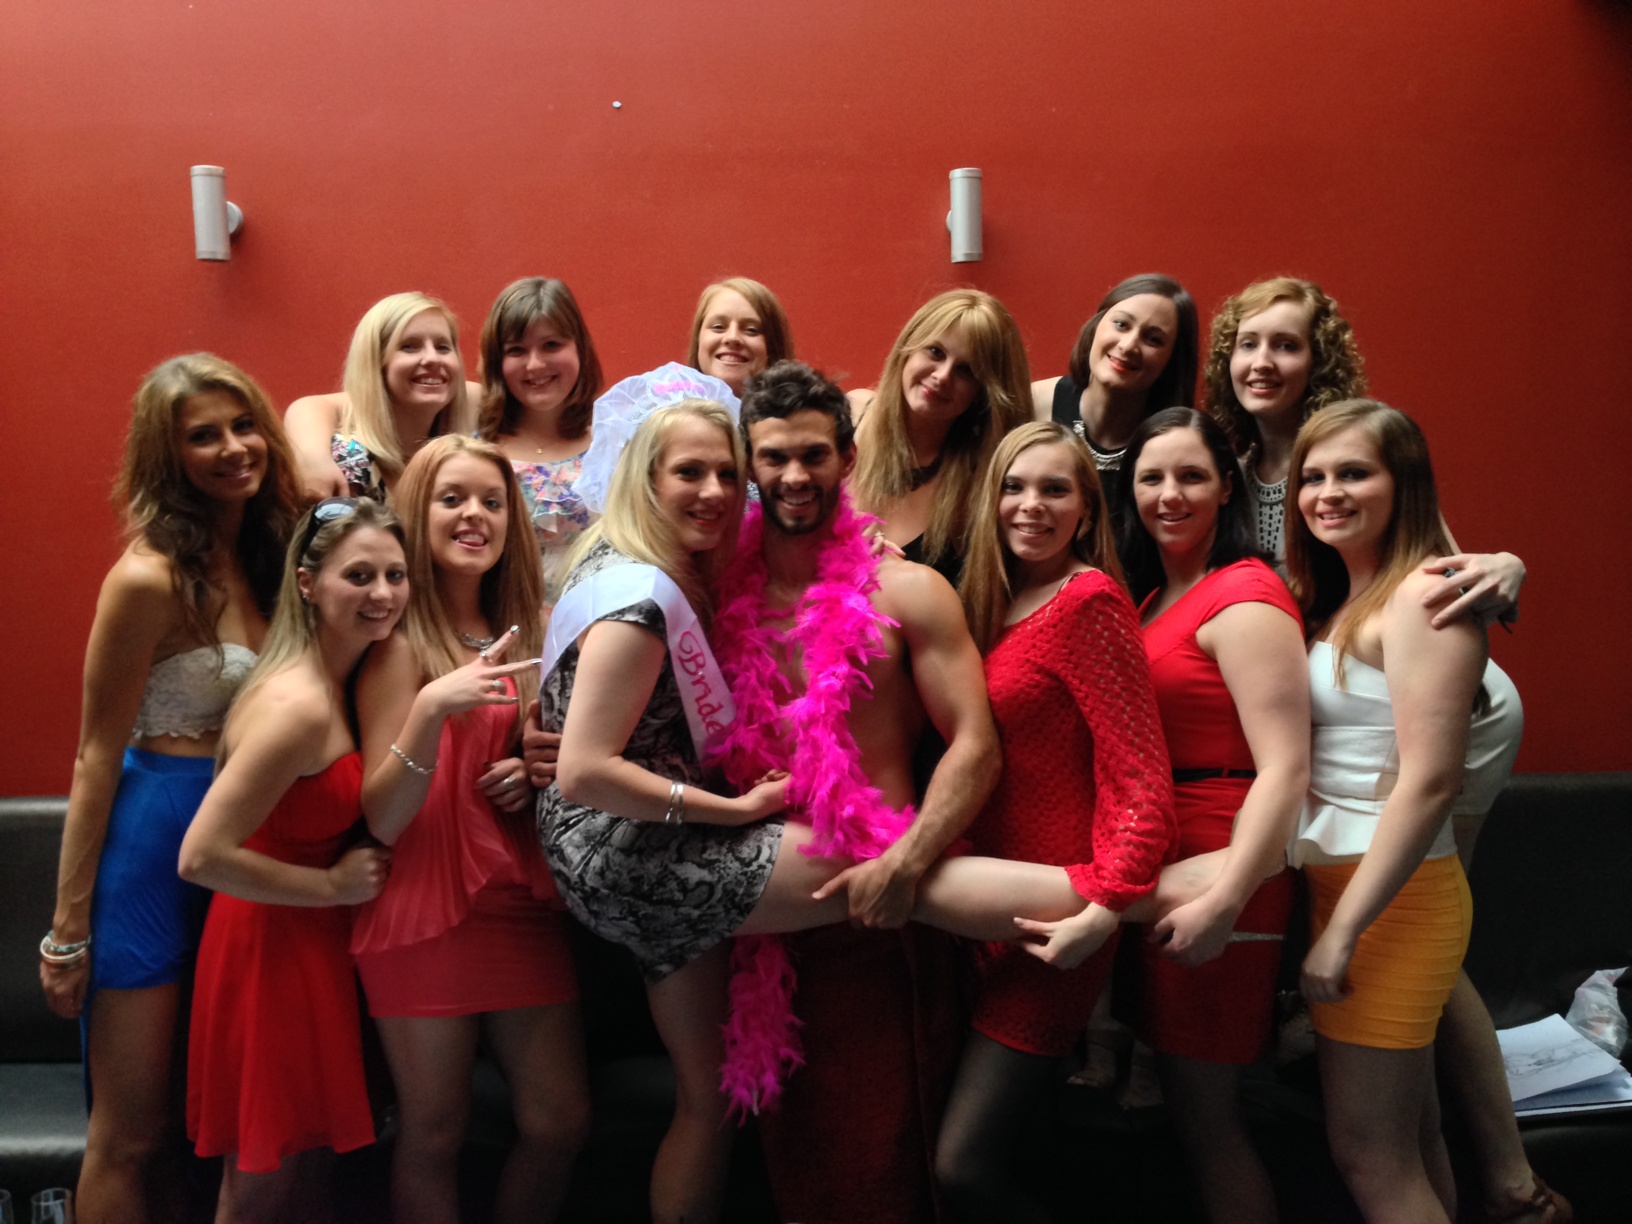 years.To attend a Hens night Sydney Party advance booking is required